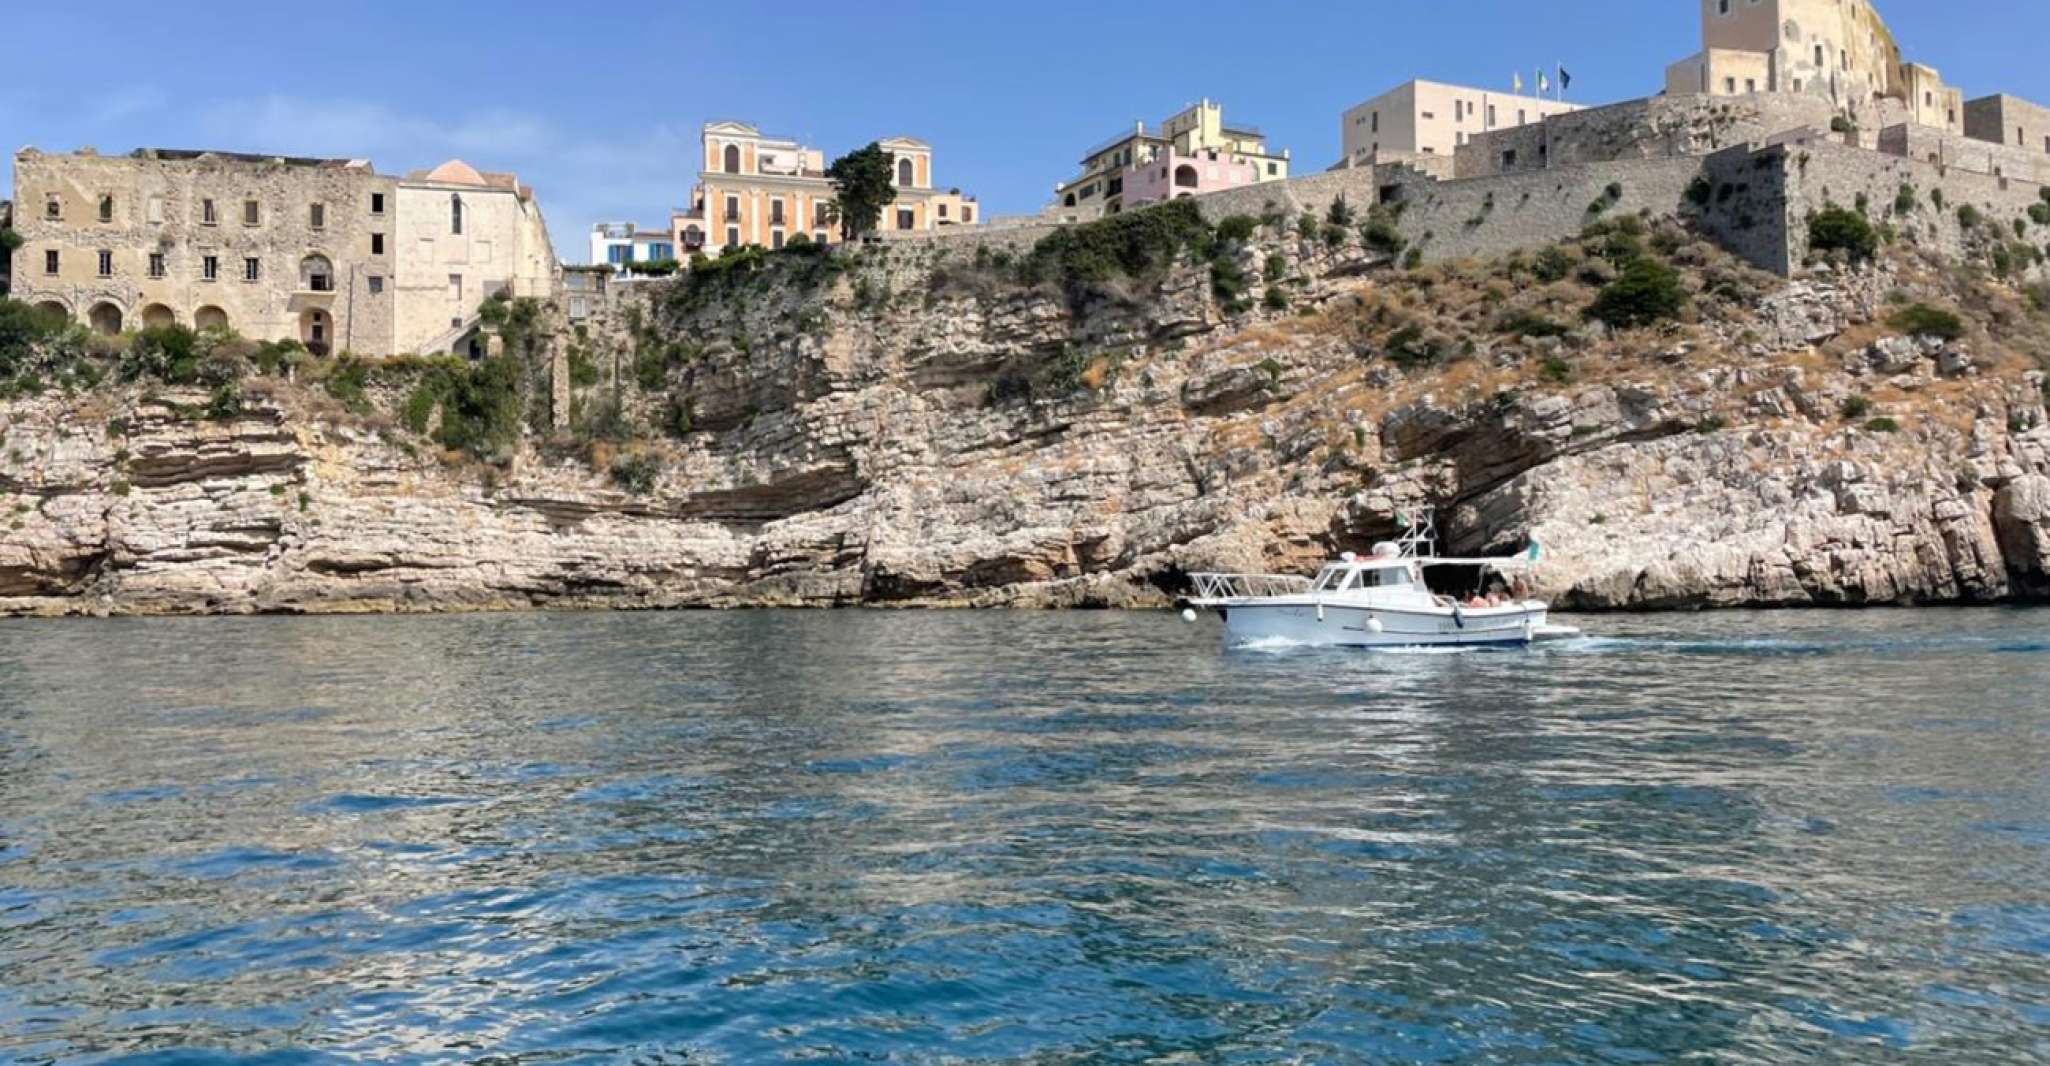 Gaeta, Guided Boat Tour with Snorkeling Experience - Housity